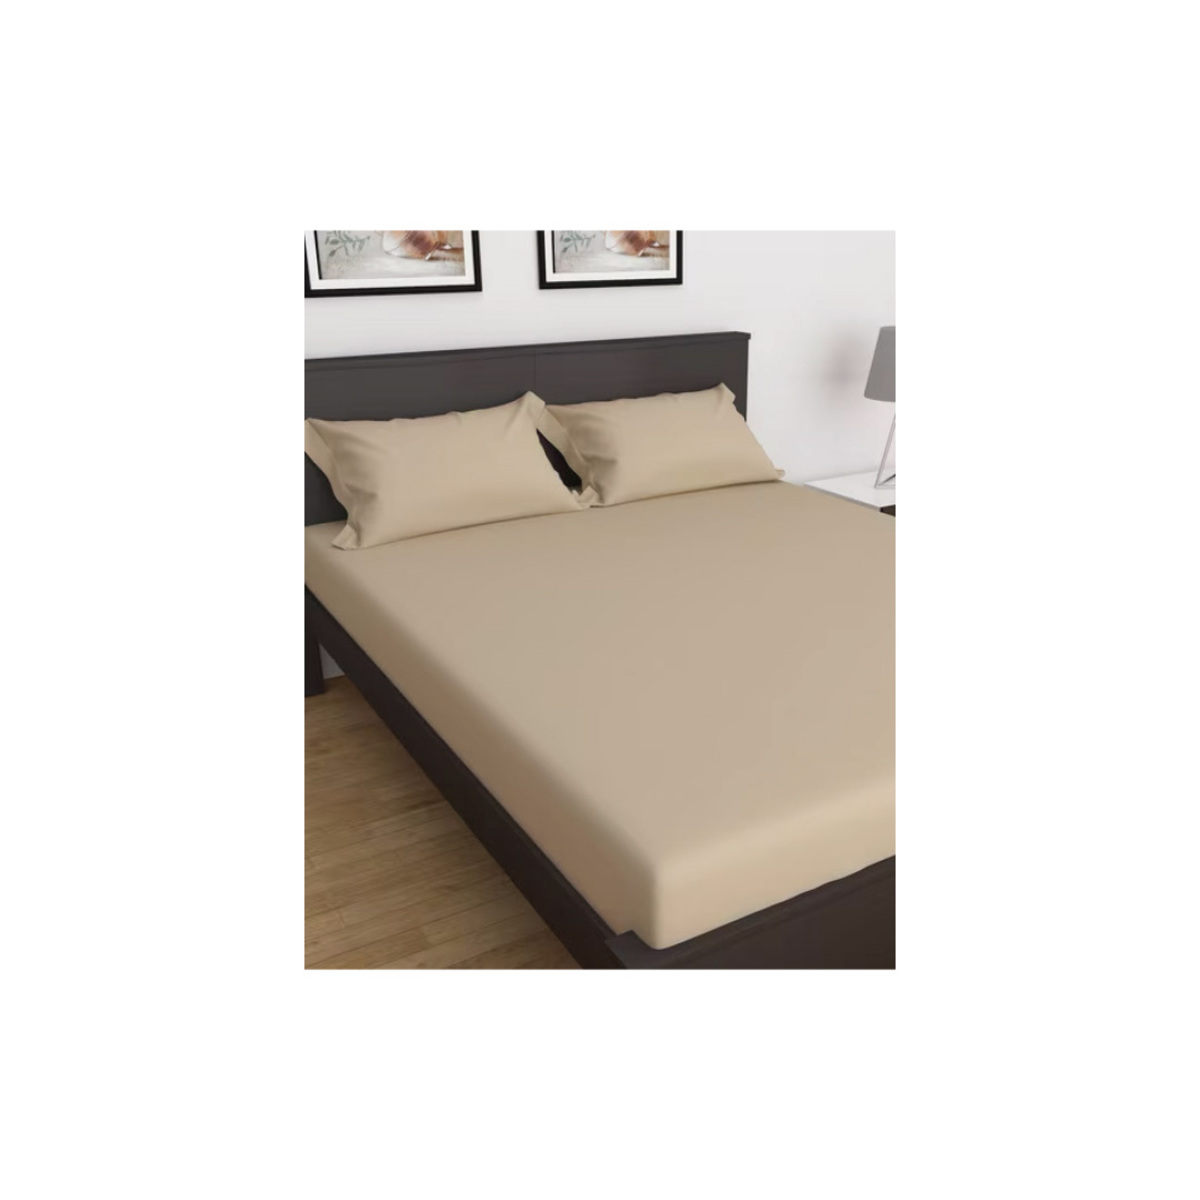 Bed Bath Bulk Cotton Fitted BedSheet King 600Tc